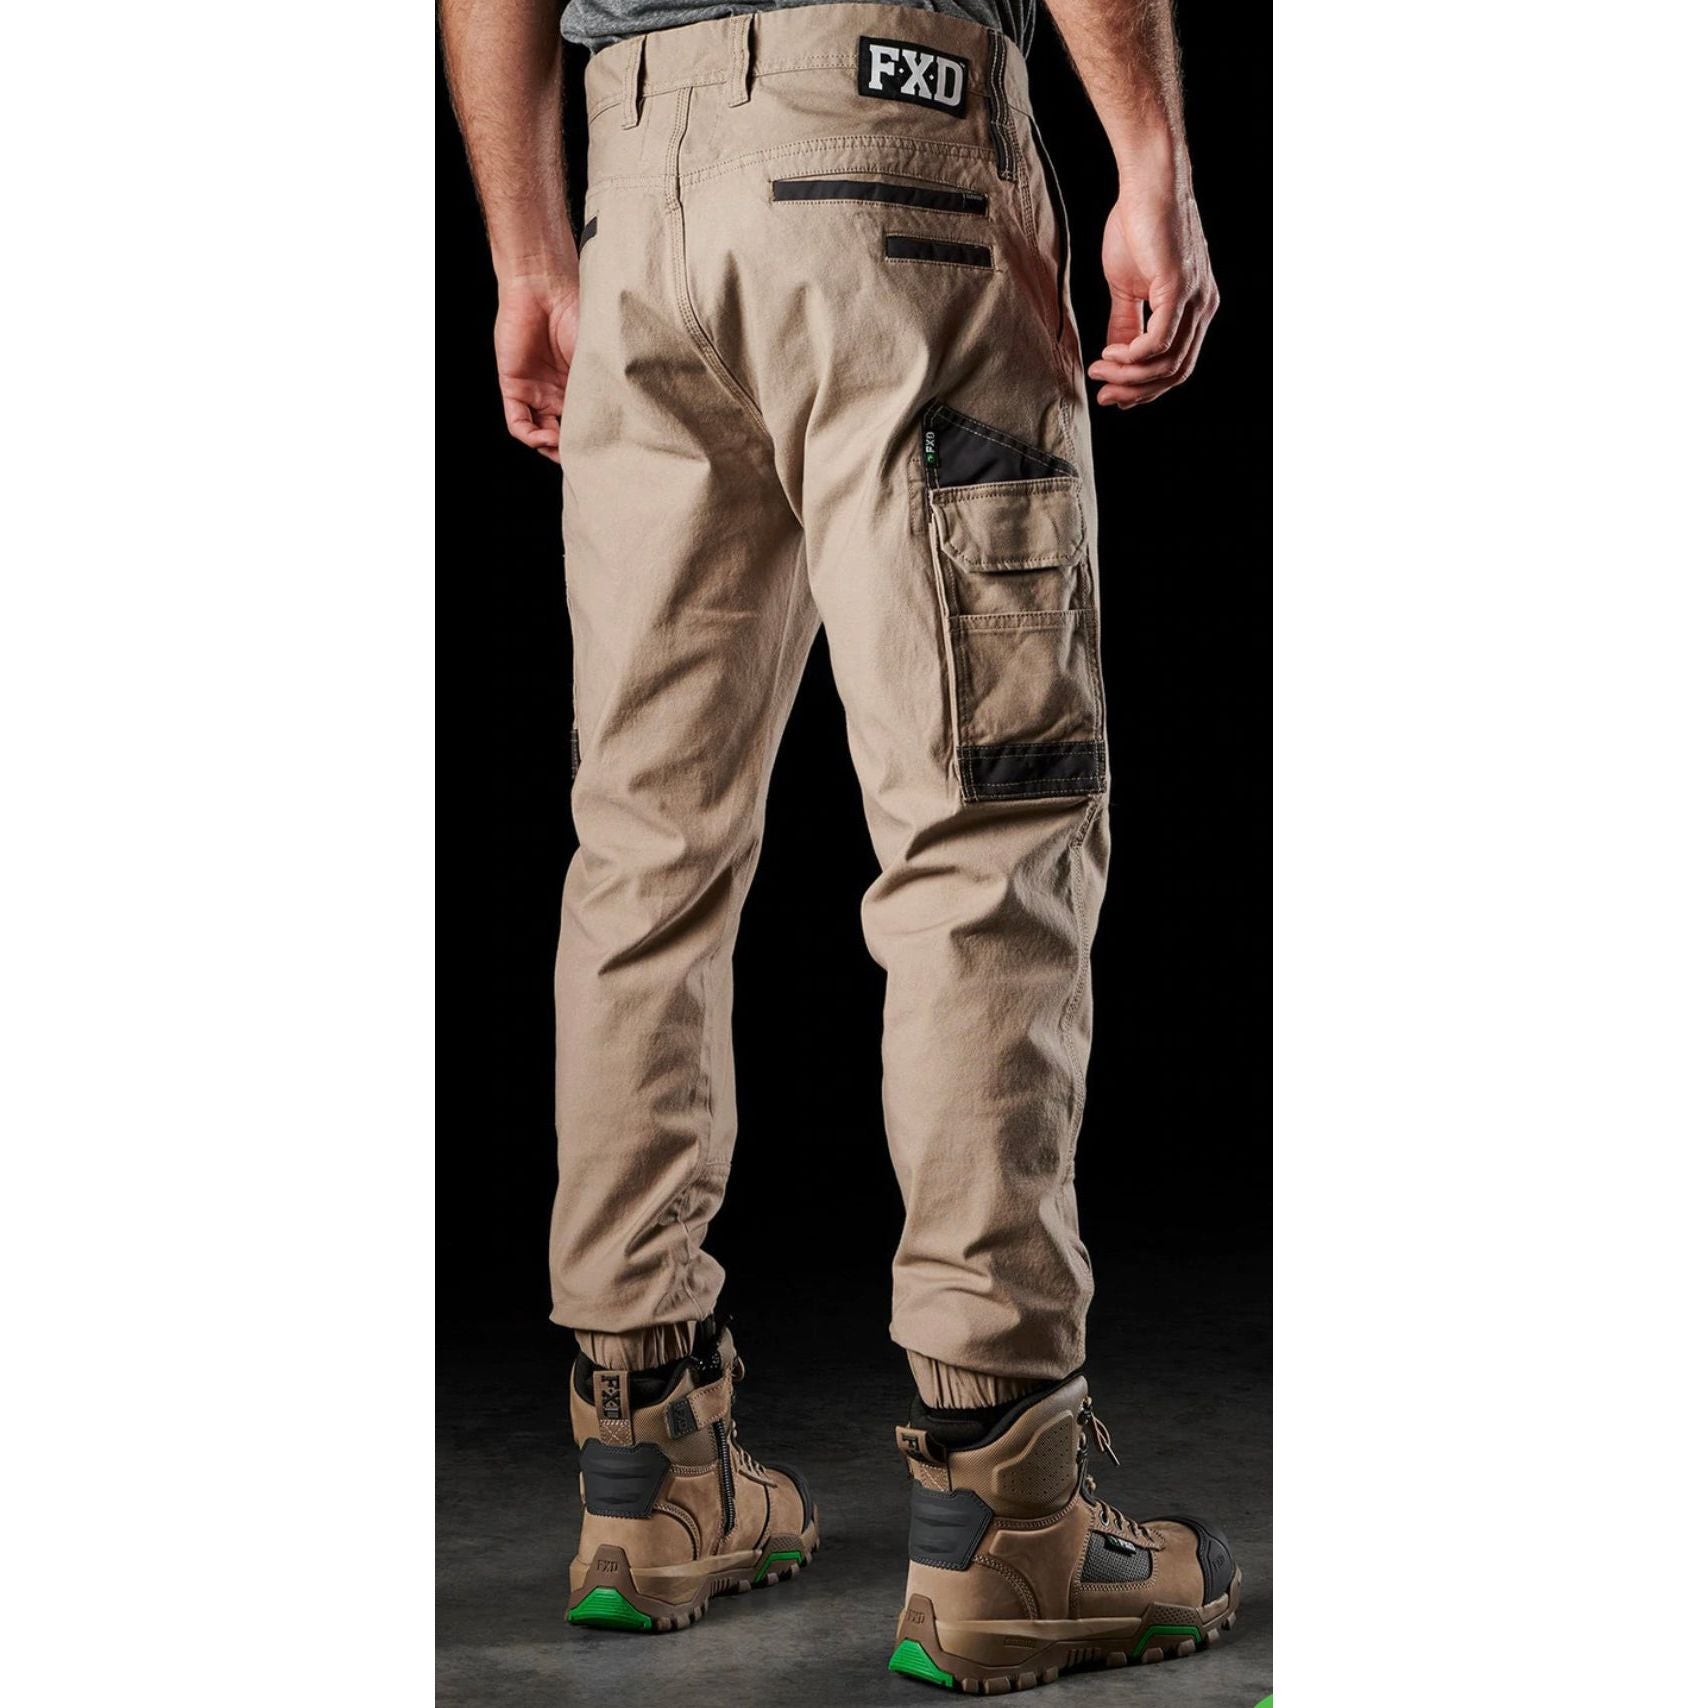 FXD Men WP-4 Stretch Cuffed Work Pants Lighterweight Strong Cotton